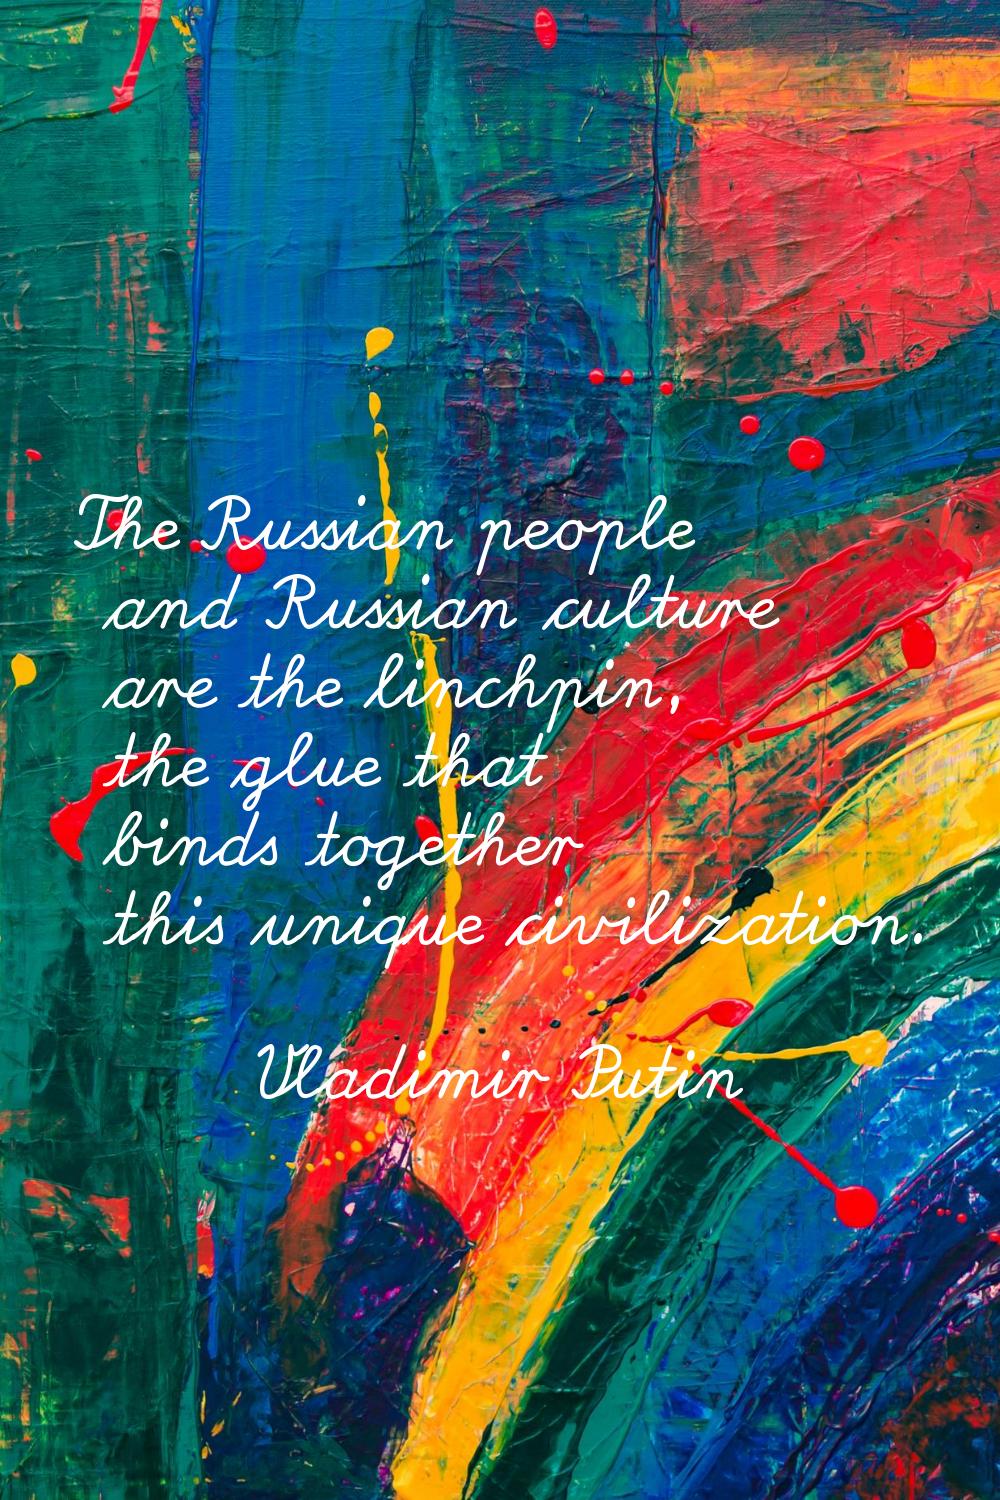 The Russian people and Russian culture are the linchpin, the glue that binds together this unique c